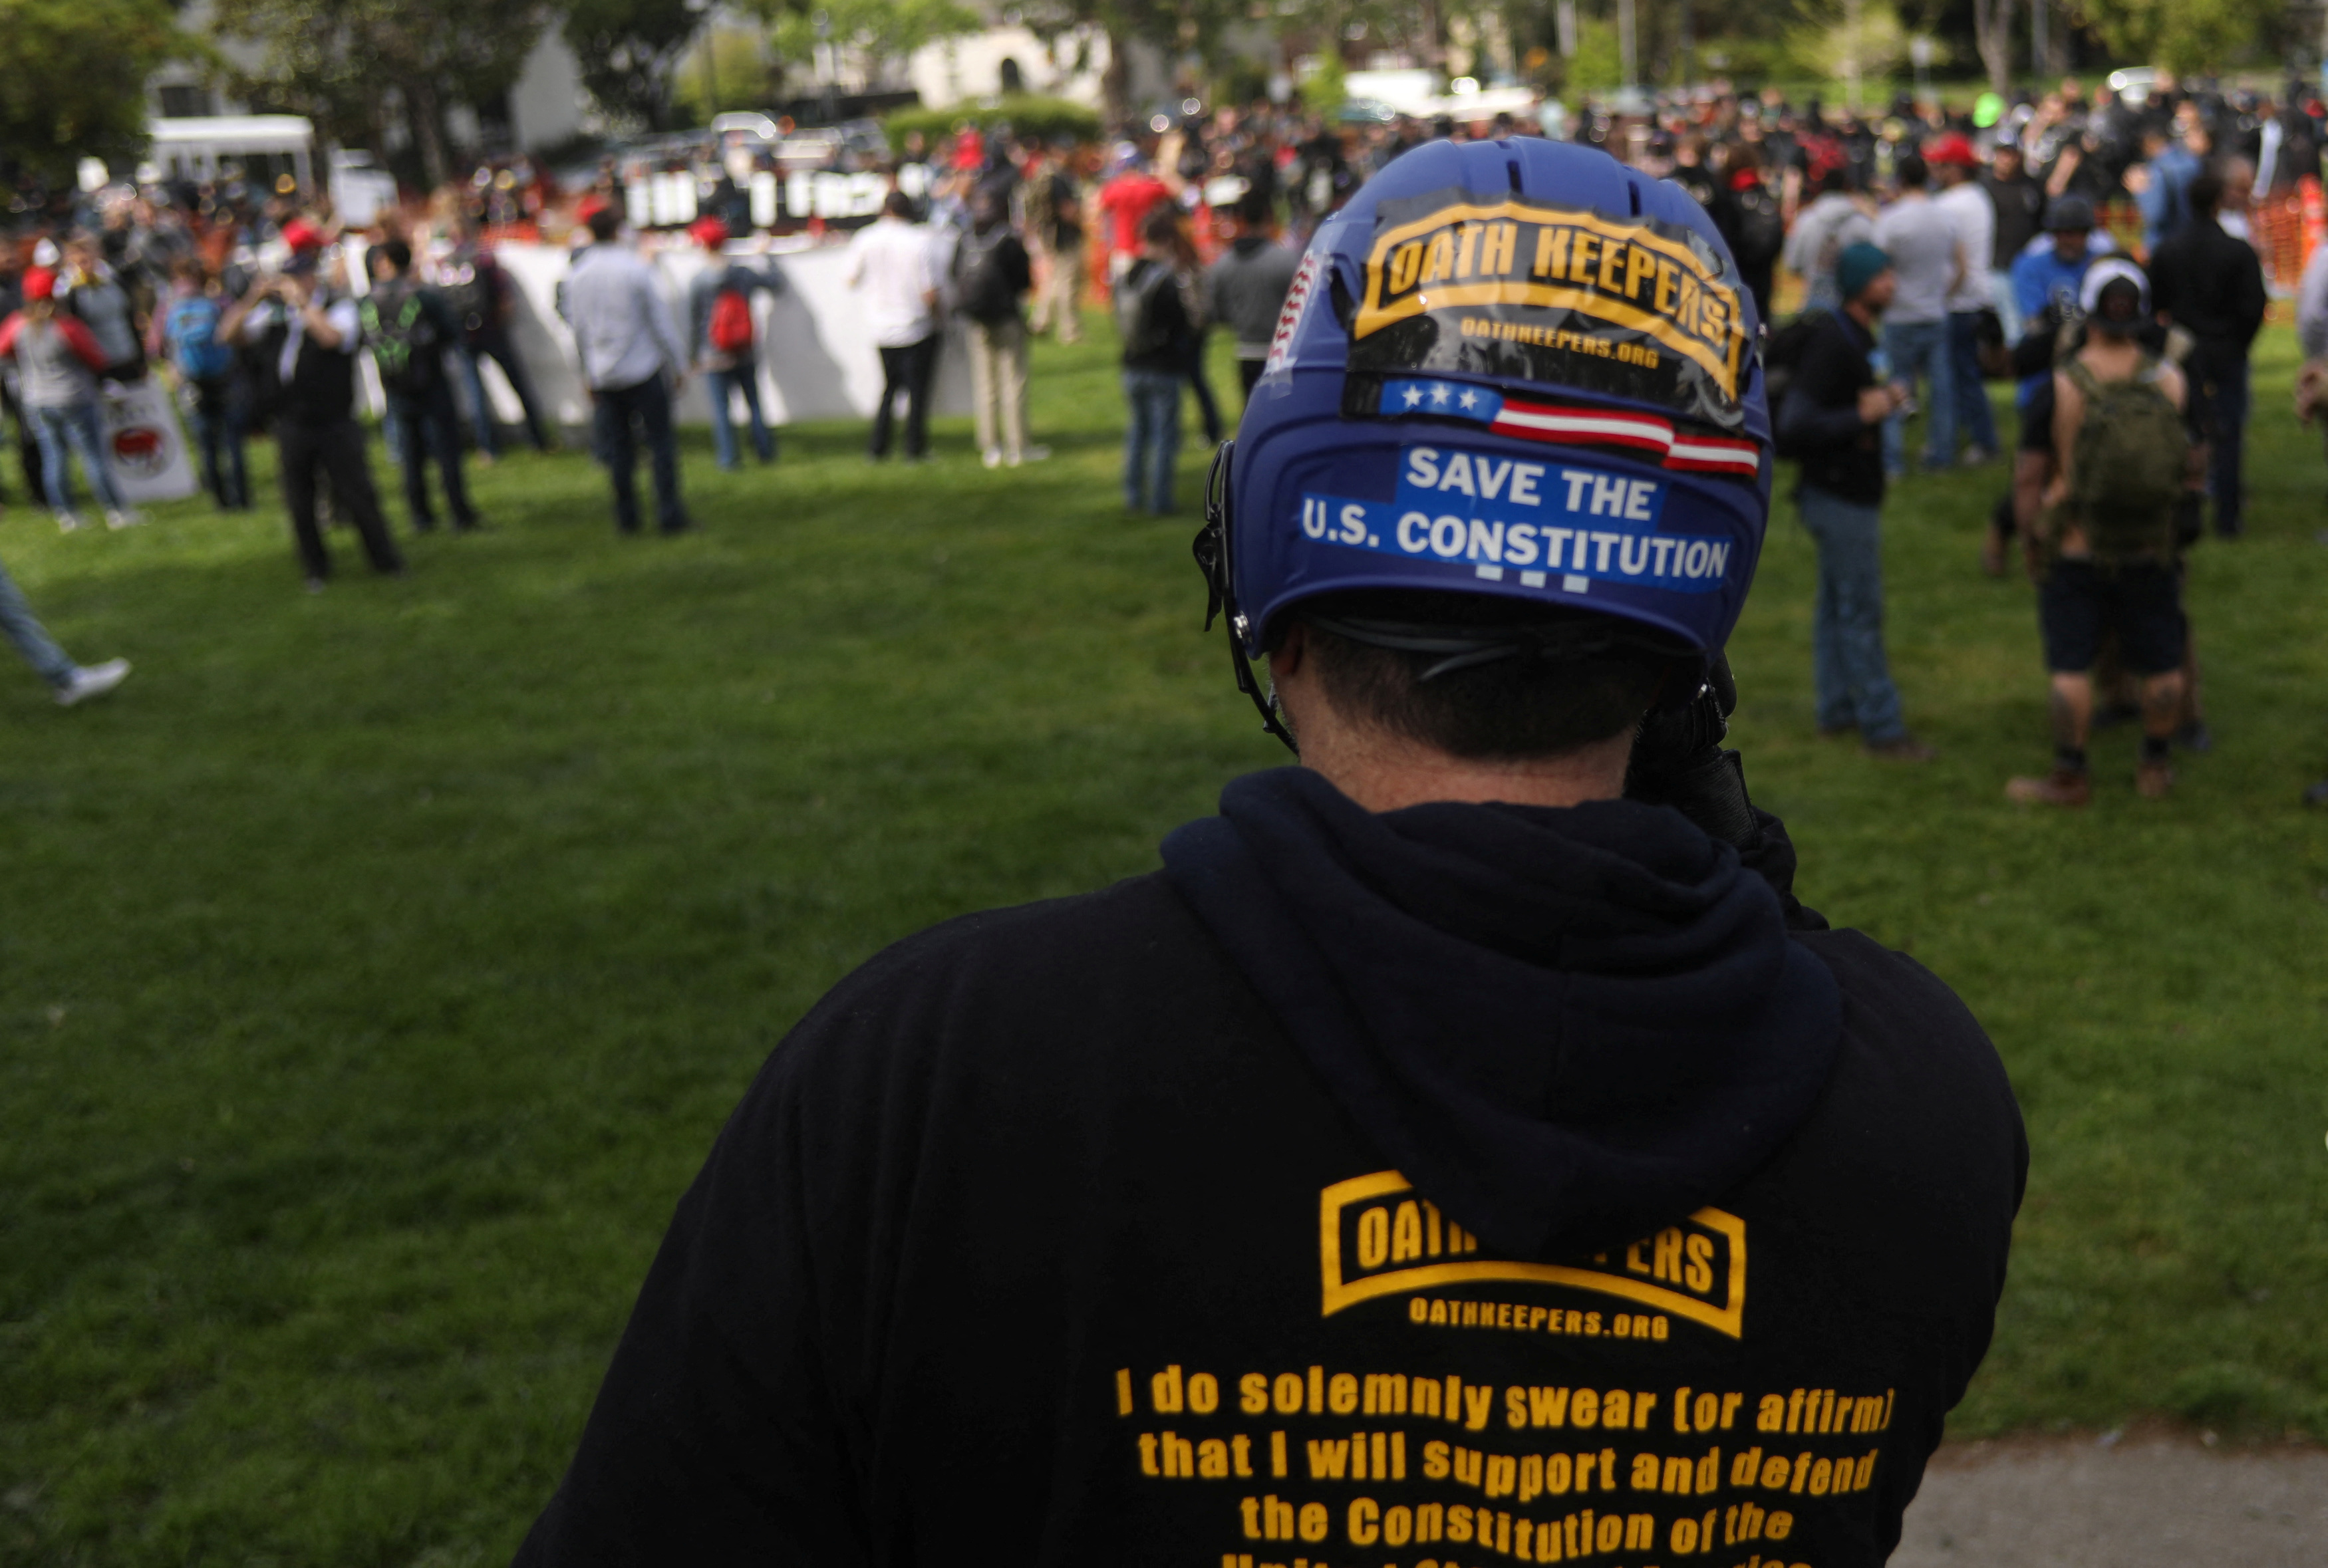 Members of the Oath Keepers provide security during the Patriots Day Free Speech Rally in Berkeley, California, U.S. April 15, 2017.  REUTERS/Jim Urquhart